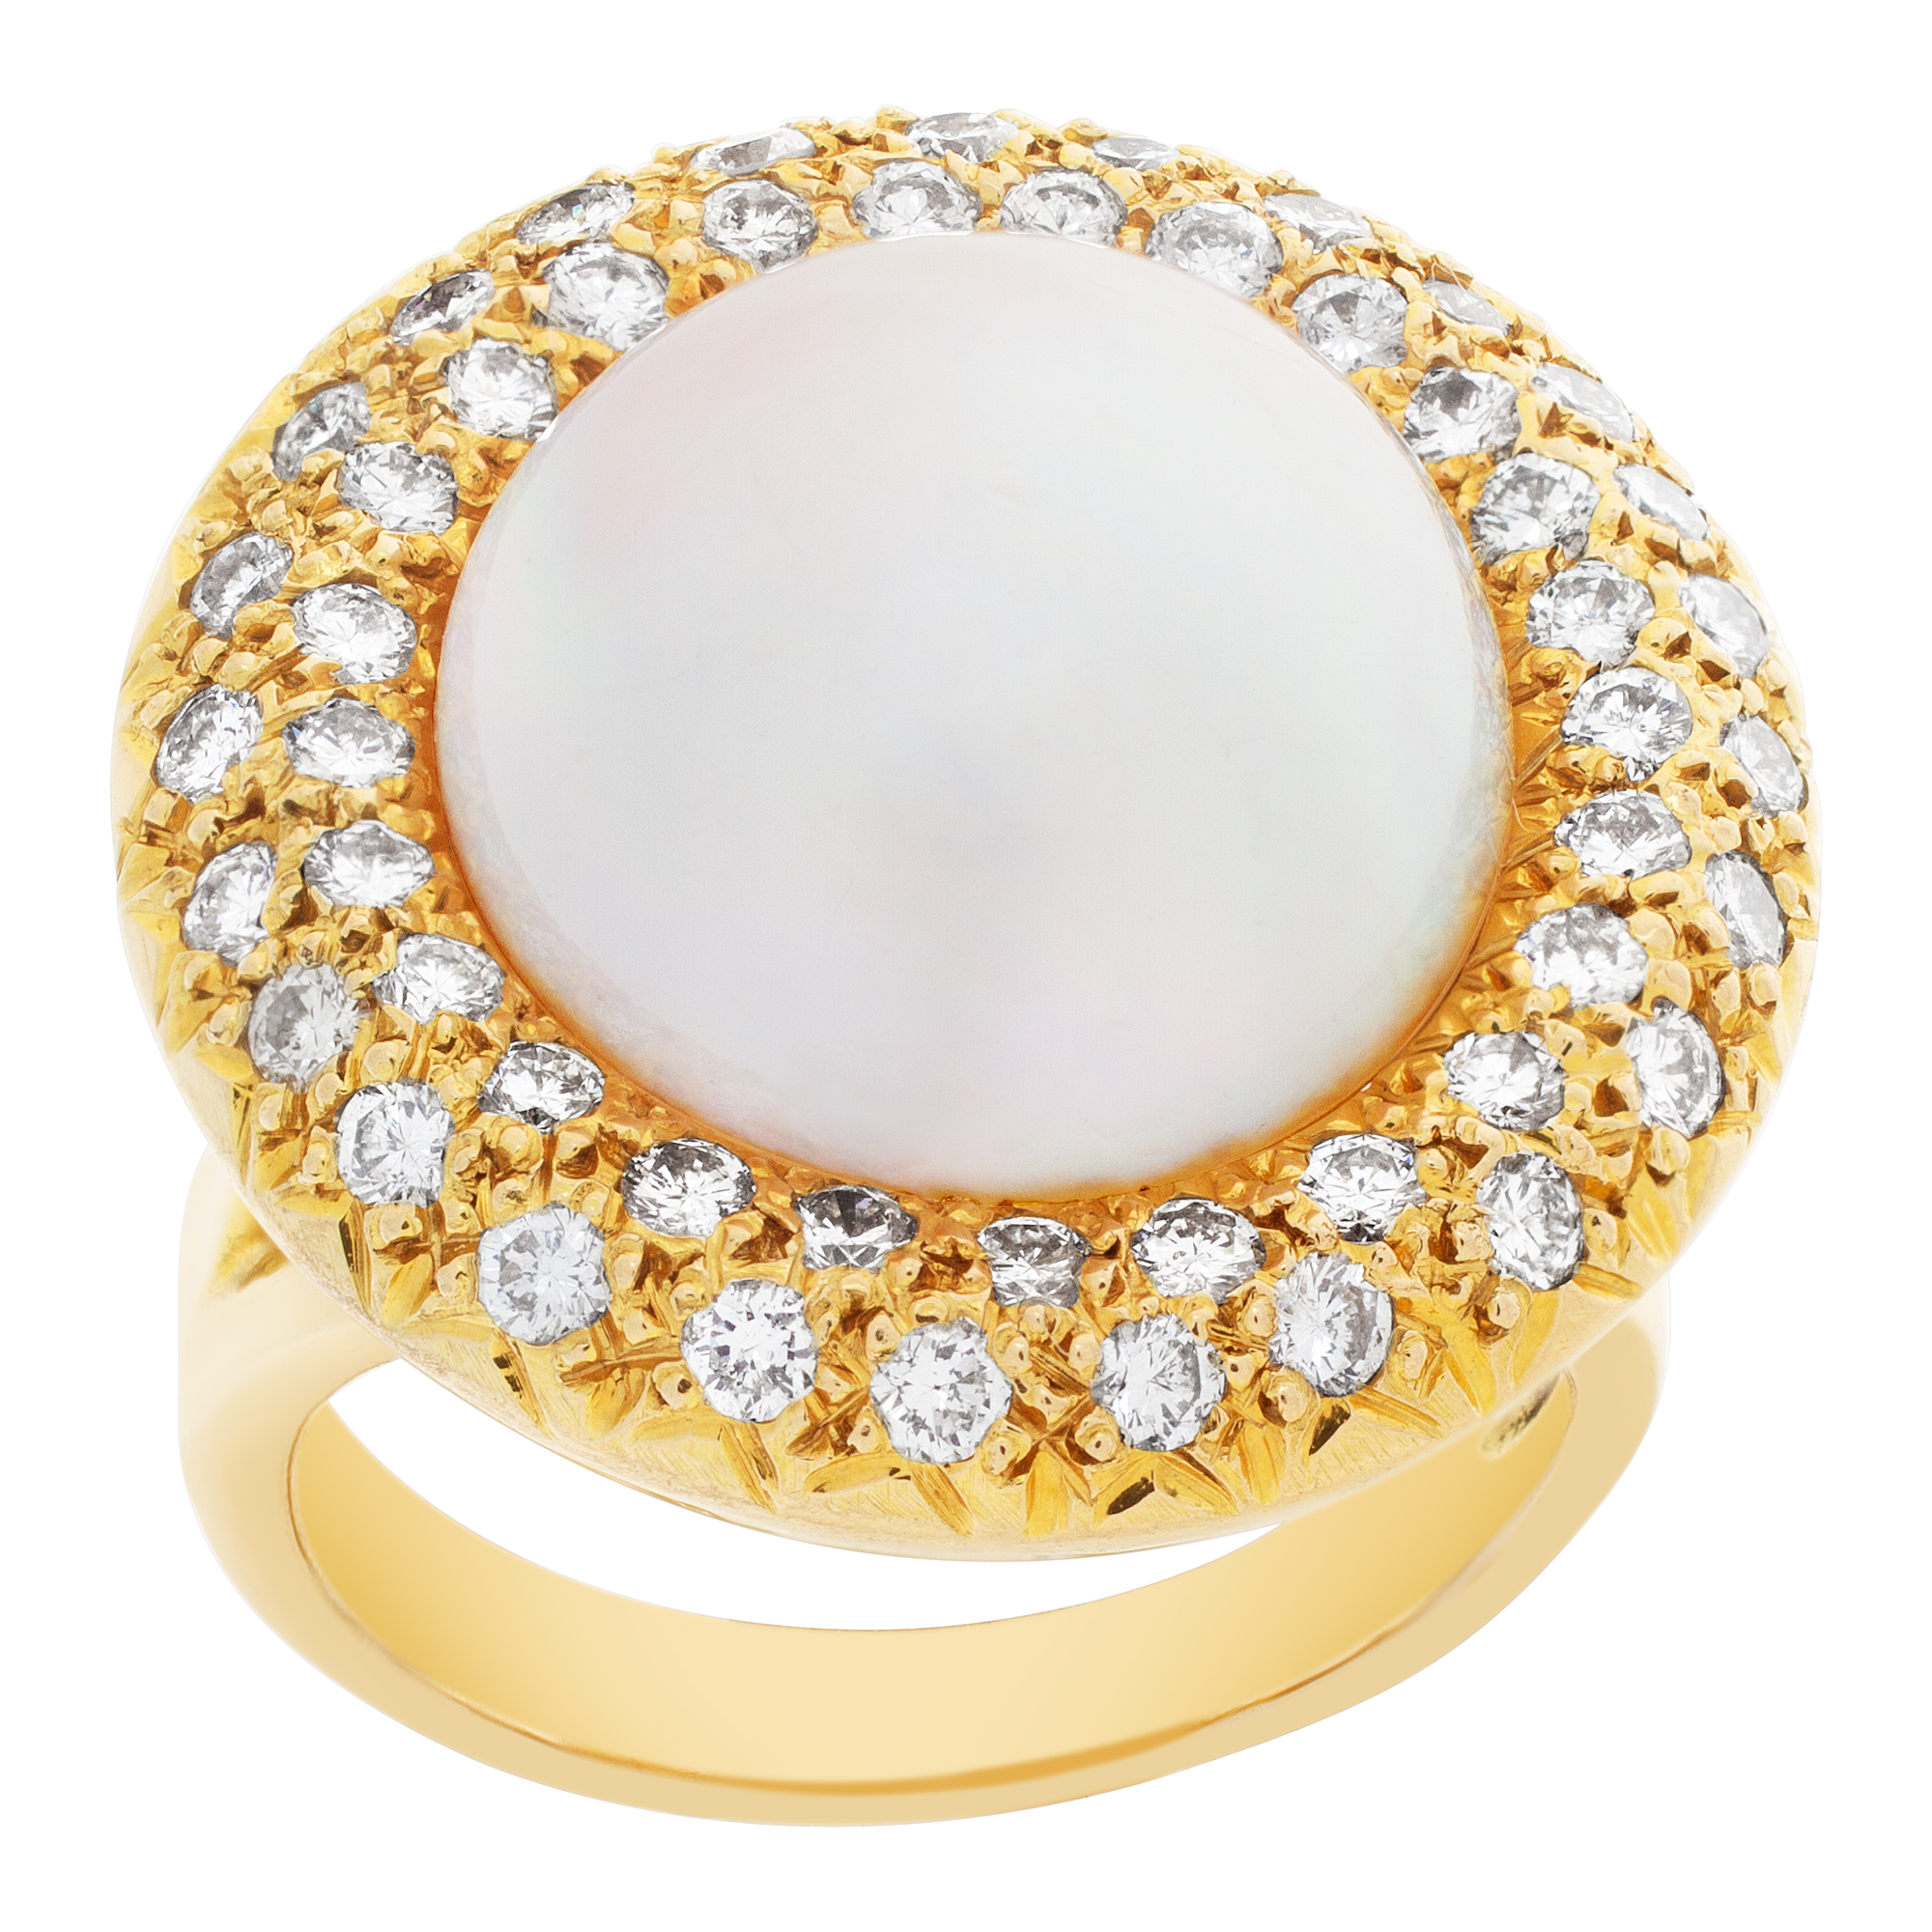 Mabe pearl ring with full cut round brilliant HAlo diamonds set in 14Kt yellow gold image 1